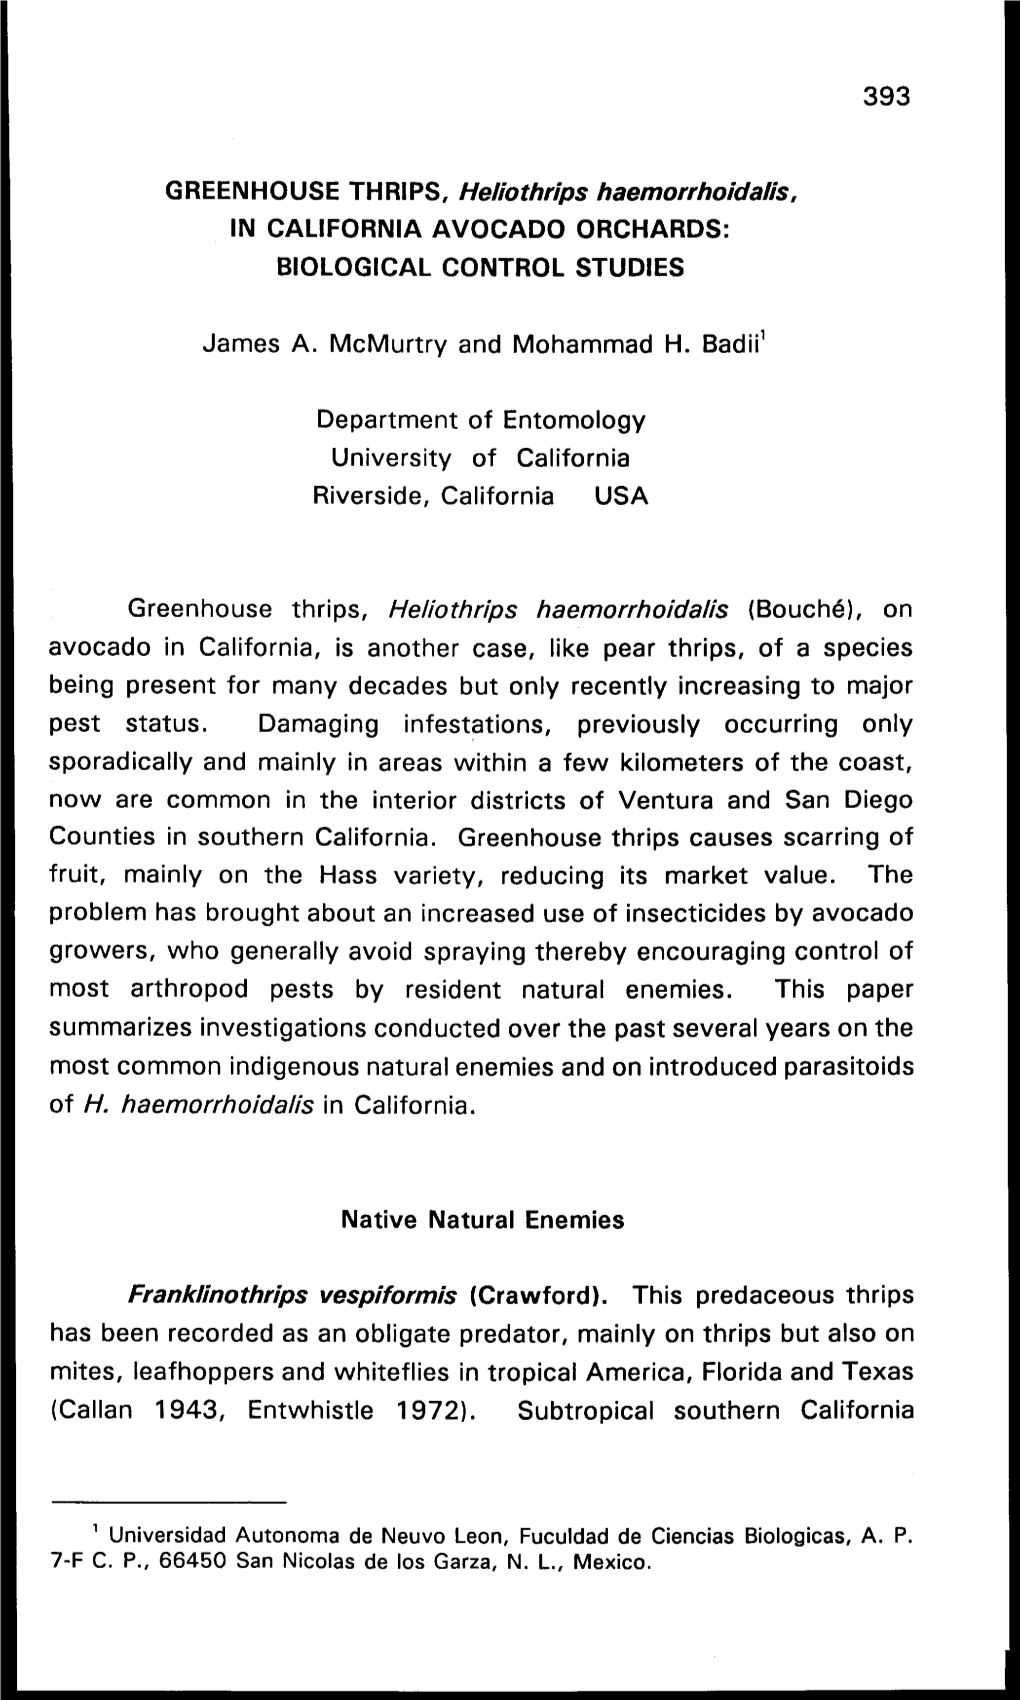 GREENHOUSE THRIPS, Heliothrips Haemorrhoidalis, in CALIFORNIA AVOCADO ORCHARDS: BIOLOGICAL CONTROL STUDIES